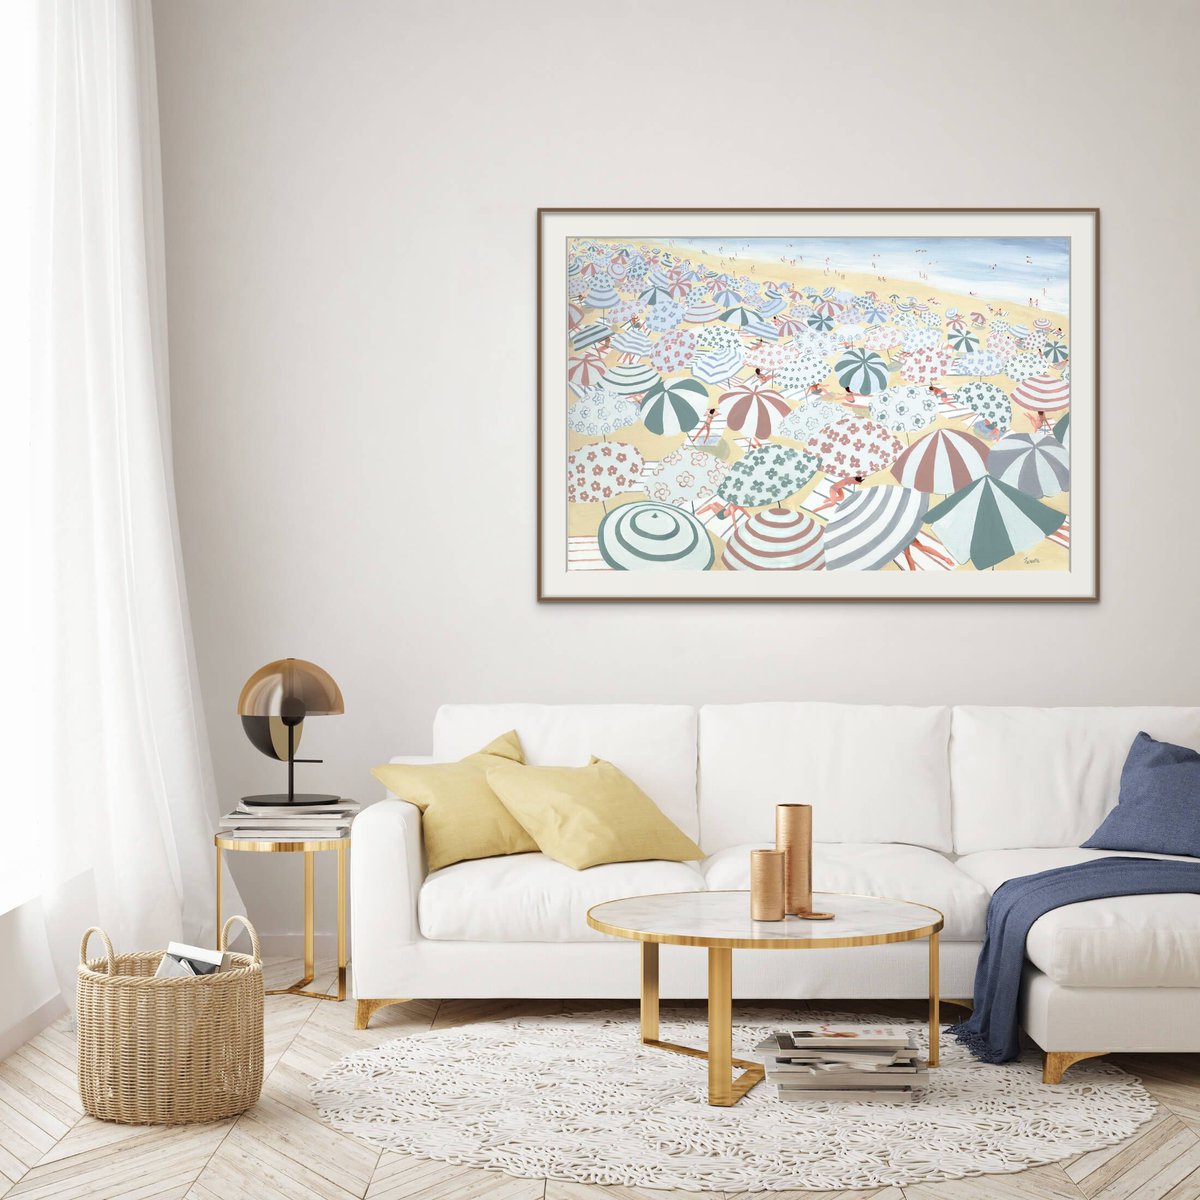 We’ve got a brand new blog post! Get to know our new artists Fanelle White and Lois Eder 🎨🖌and get a peek into the studio of Life Art Designs! #newontheblog #newartists #wallart #contemporaryart #coastalart #artdecor #coastalgrandmother #decortrends bit.ly/3TpV3Qe